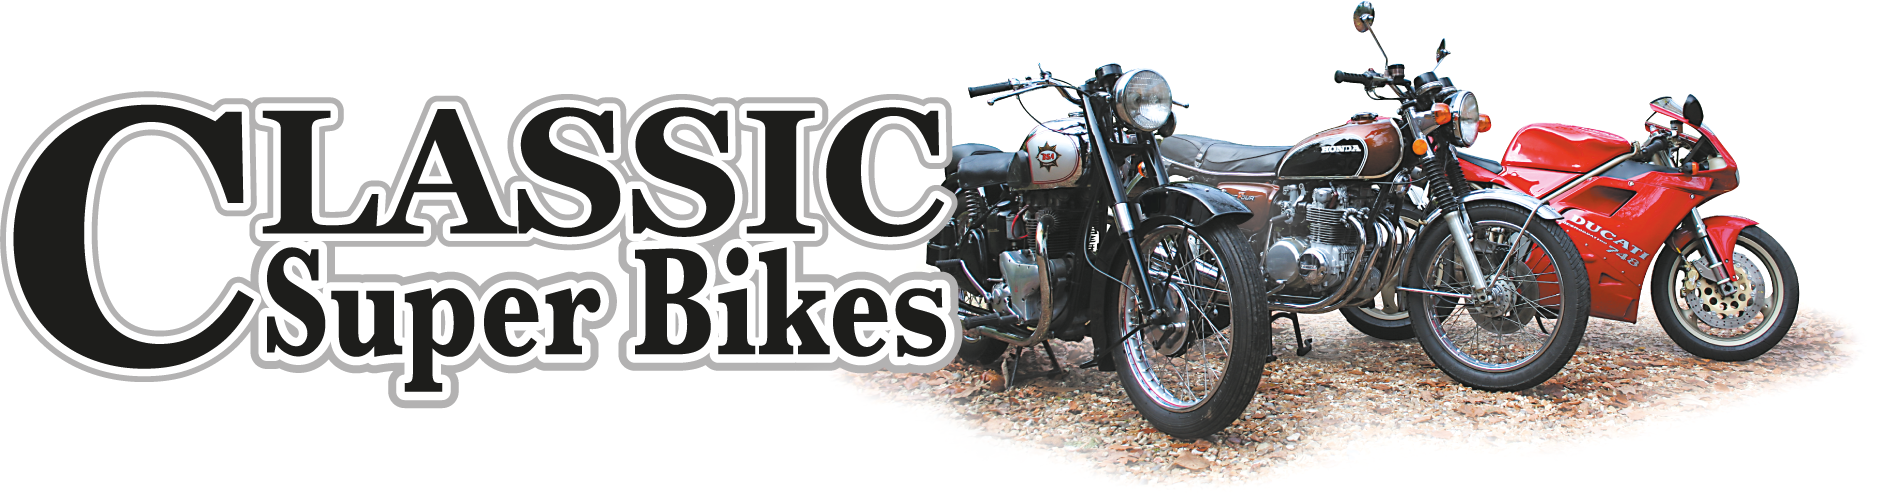 vintage british motorcycles for sale